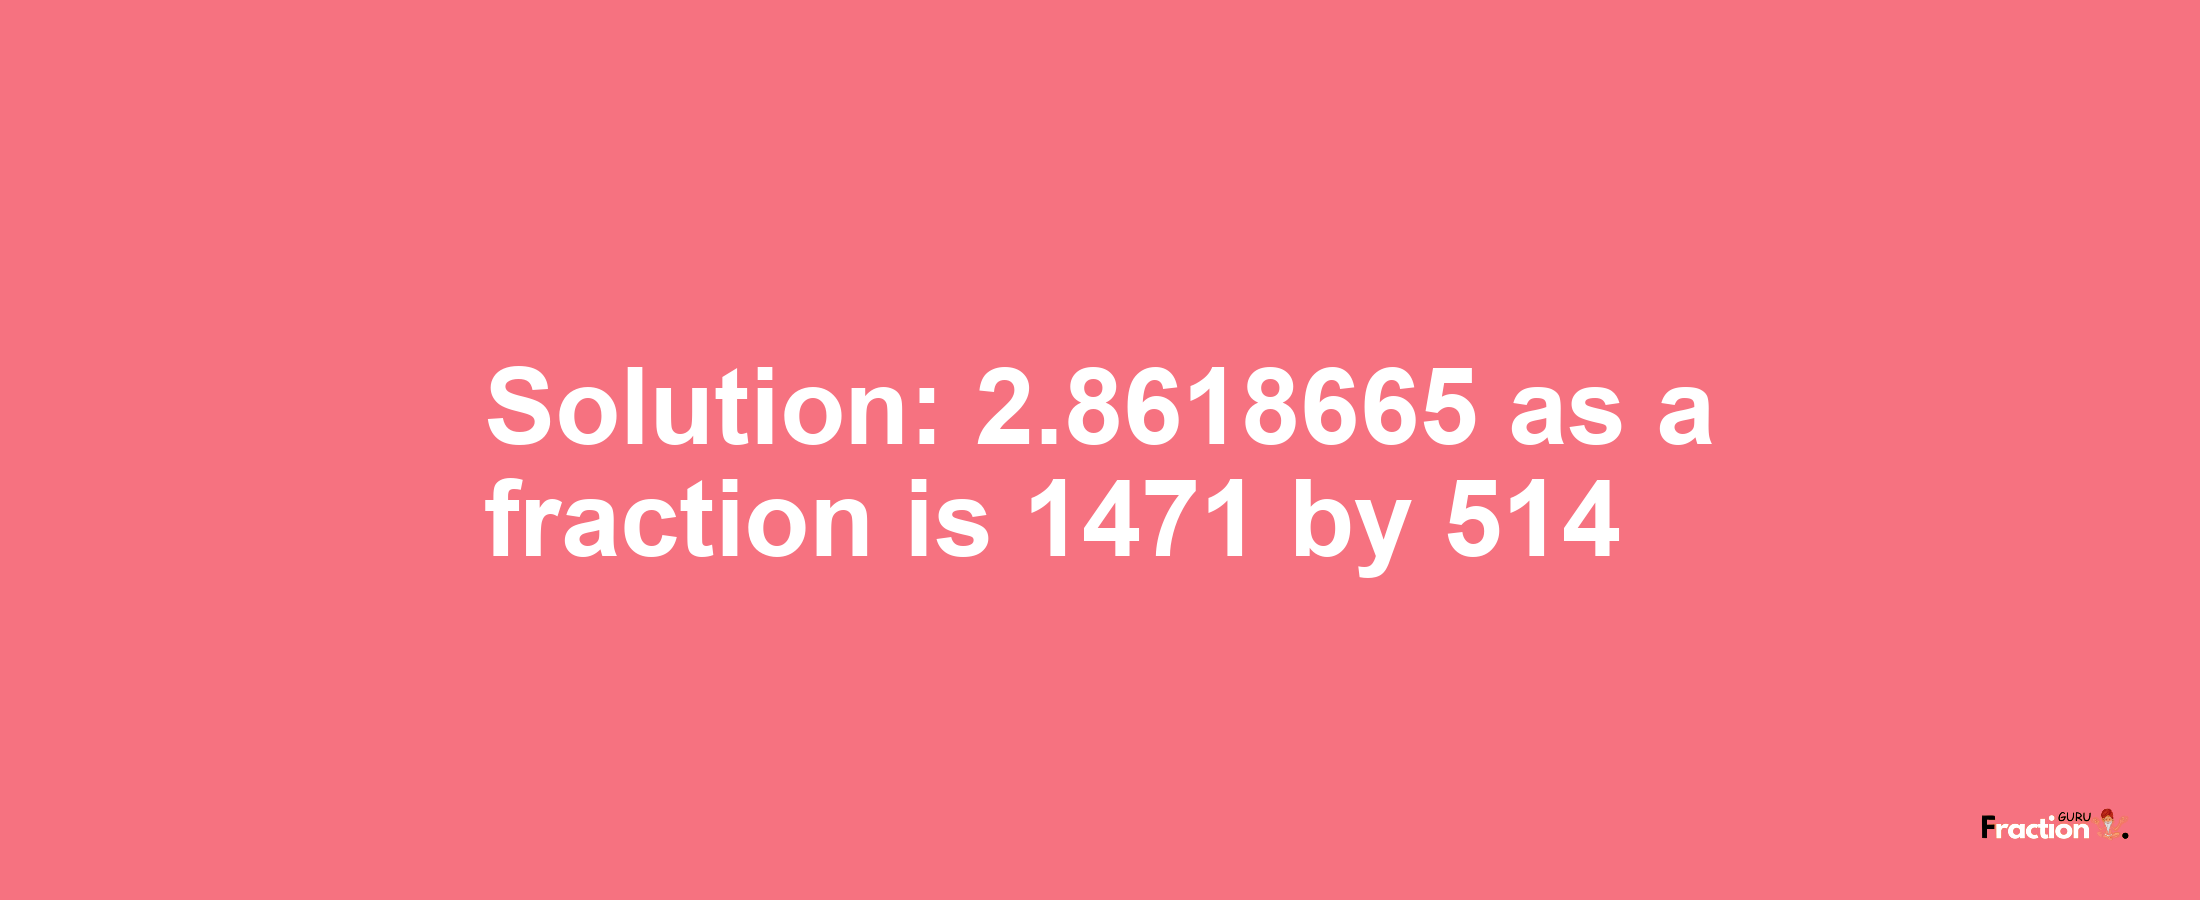 Solution:2.8618665 as a fraction is 1471/514